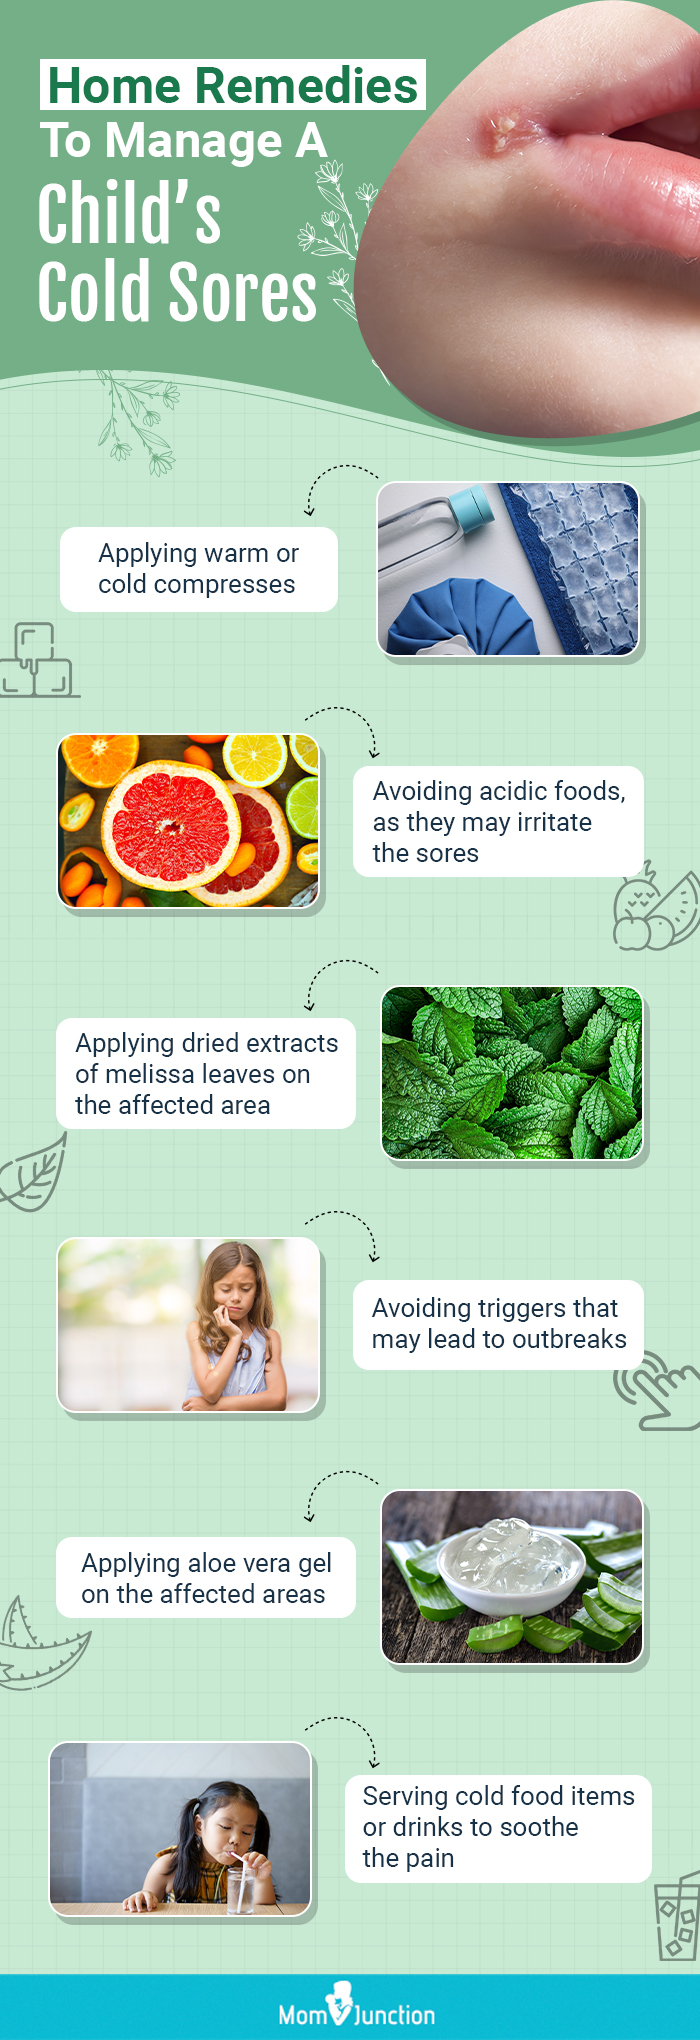 home remedies to manage a child’s cold sores [infographic]